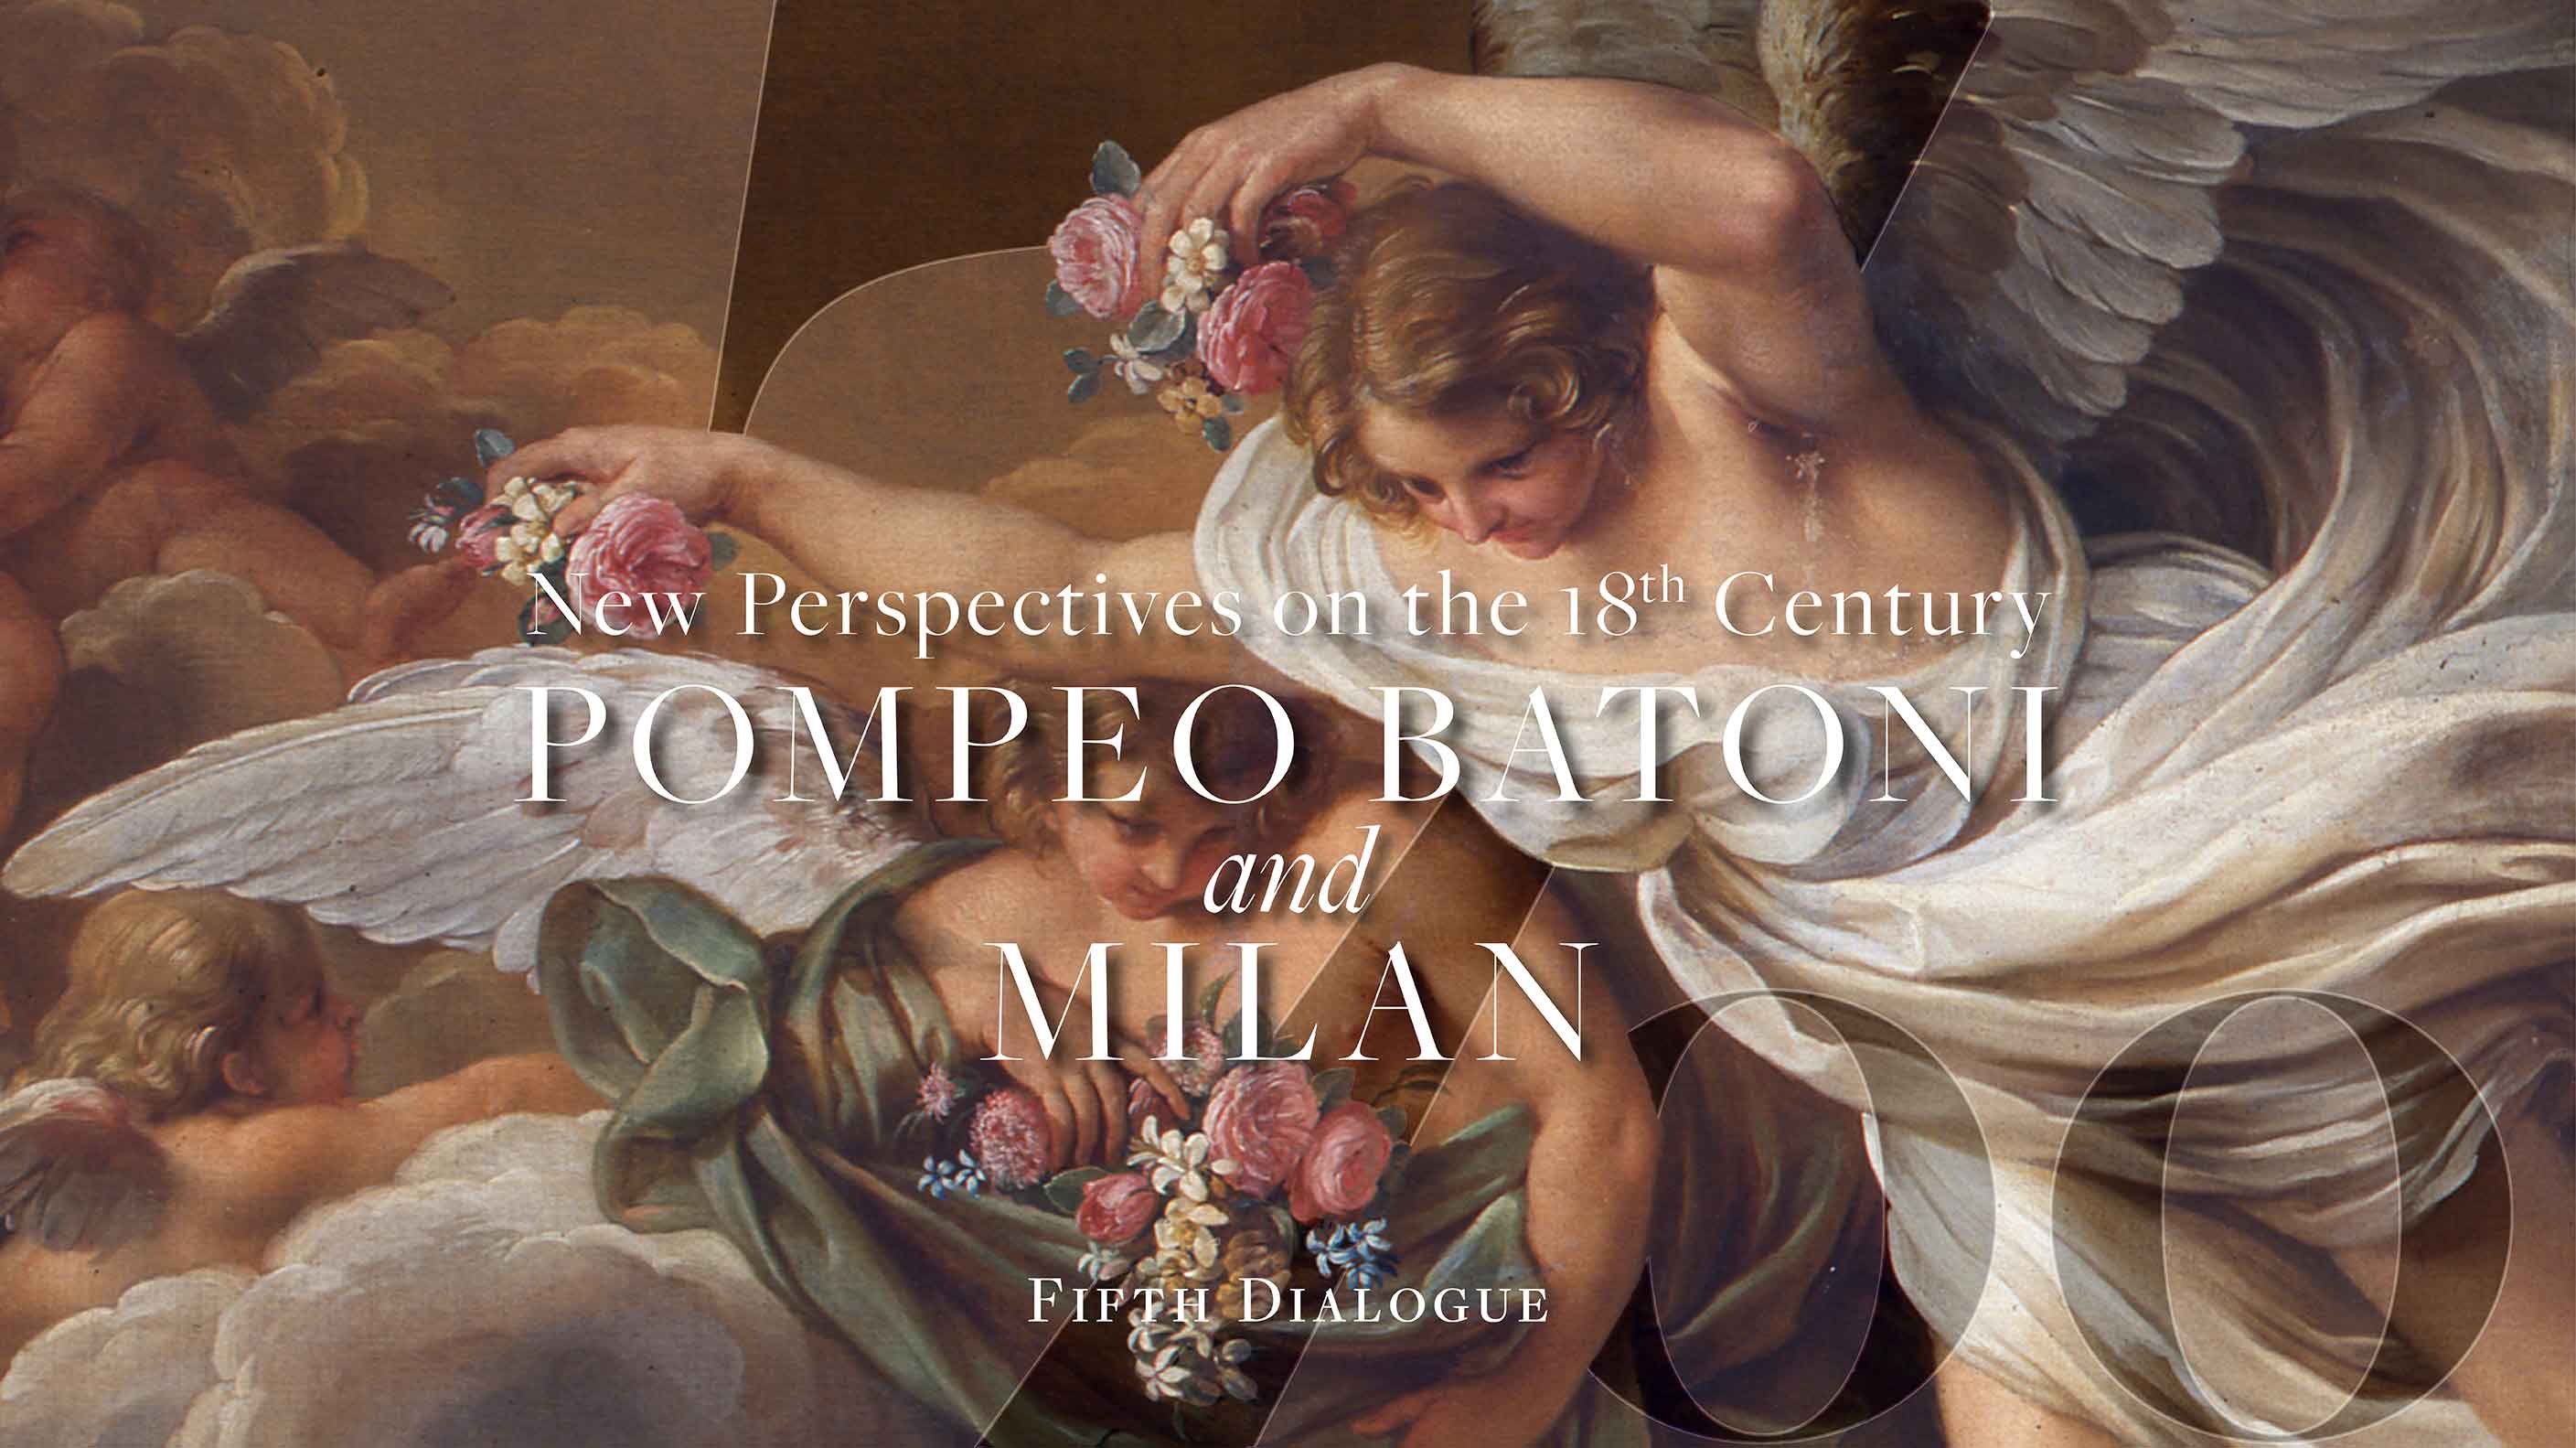 Fifth Dialogue “New Perspectives on the 18th Century. Pompeo Batoni and Milan” | Video Teaser